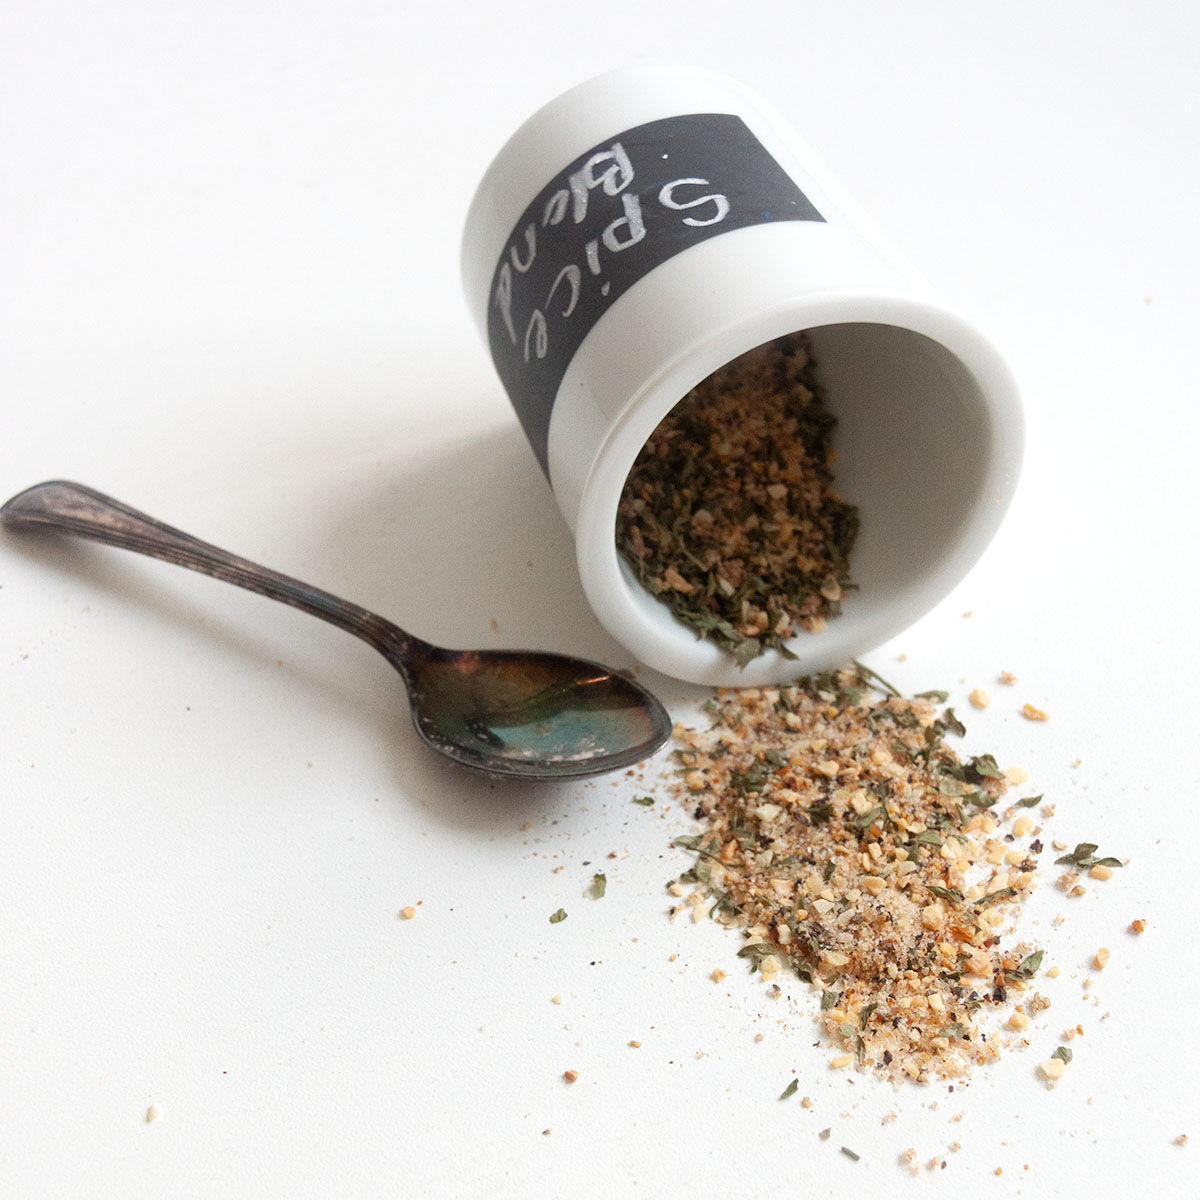 A jar of spice blend tipped on its side with some spice mix spilling out.